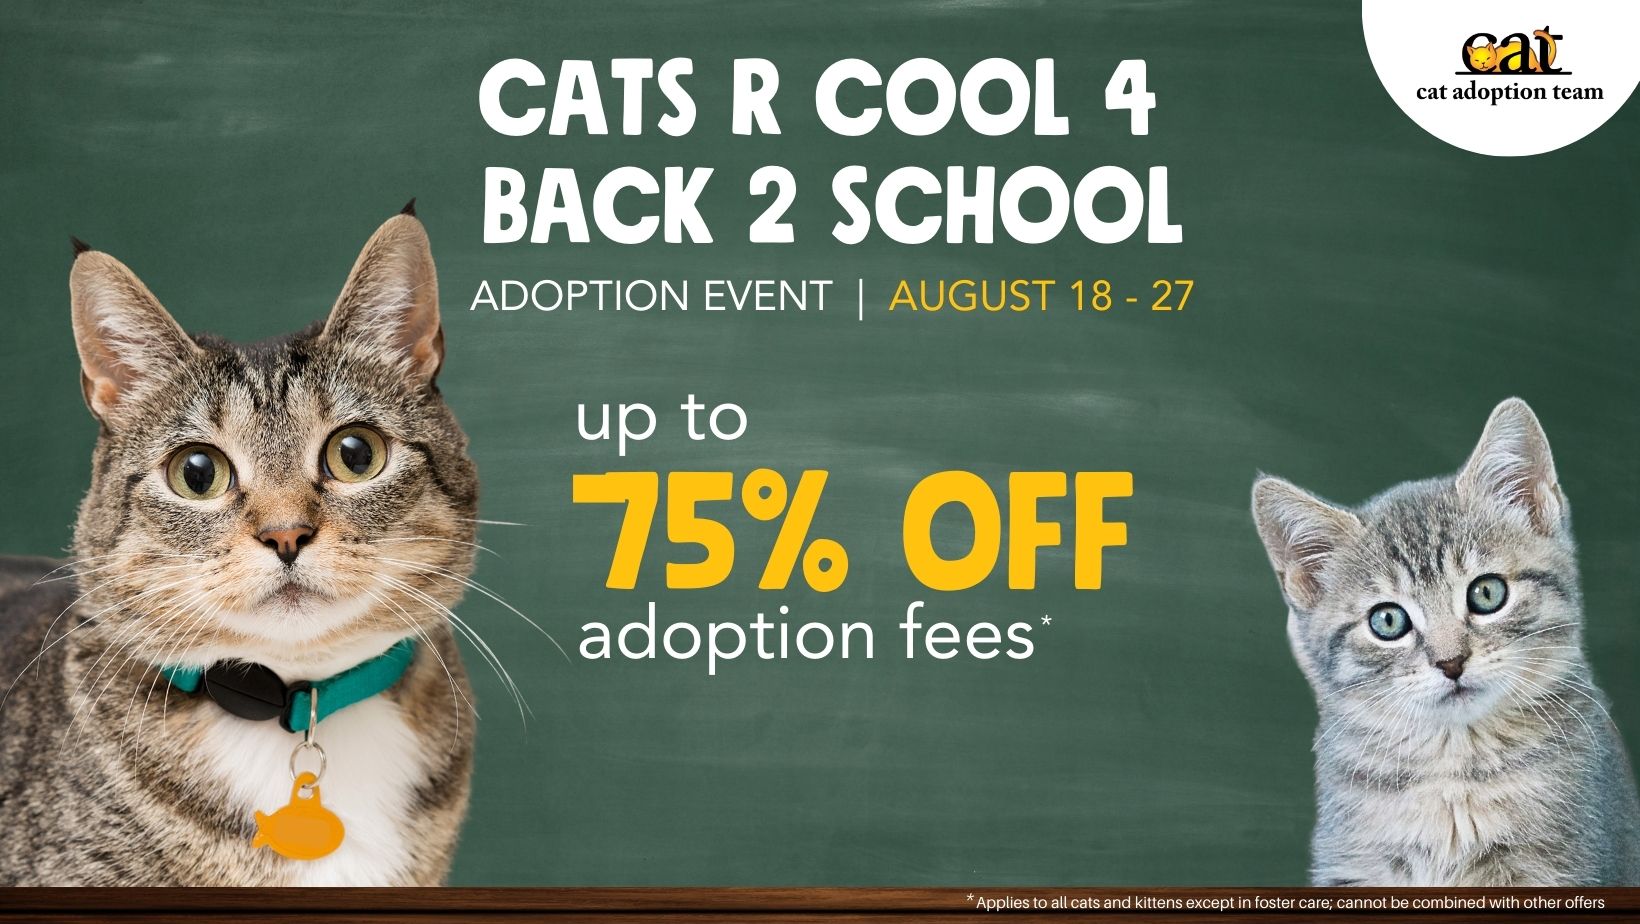 A brown tabby cat on the left and a gray tabby kitten on the right with text between them that reads Cats R Cool 4 Back 2 School. Up to 75% off adoption fees*